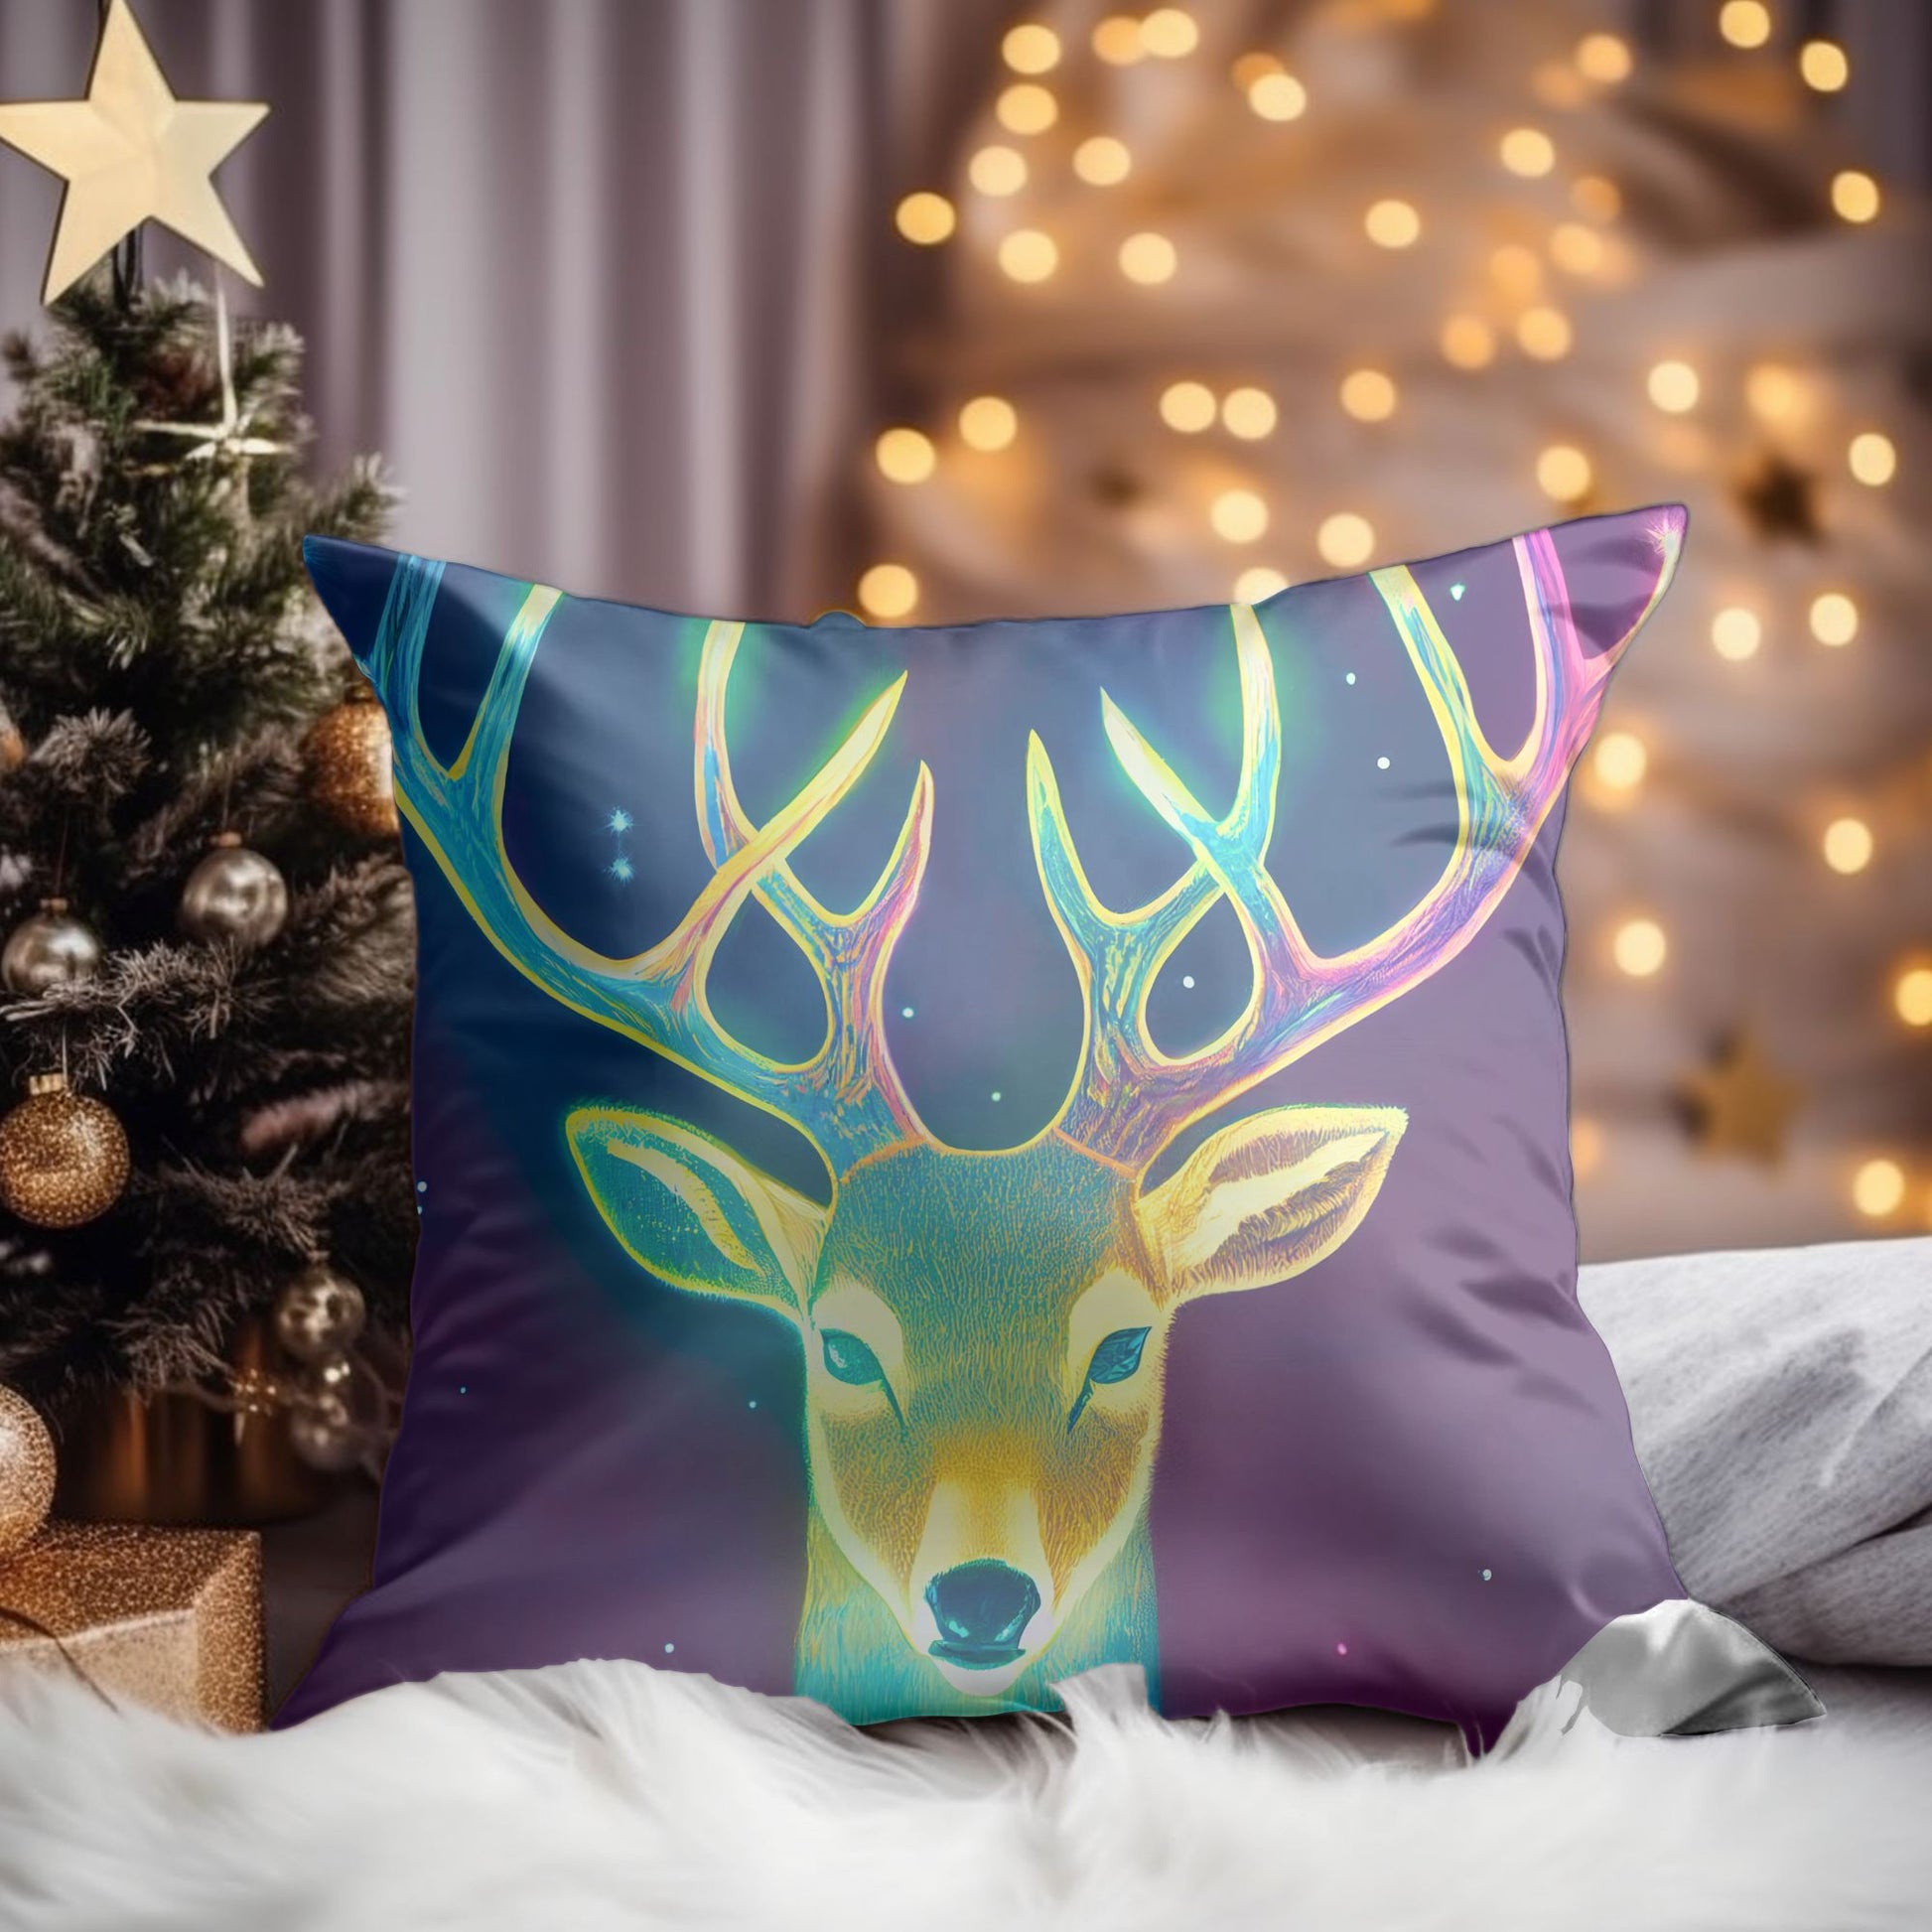 Reindeer and Snowflakes Patterned Throw Pillow Cover